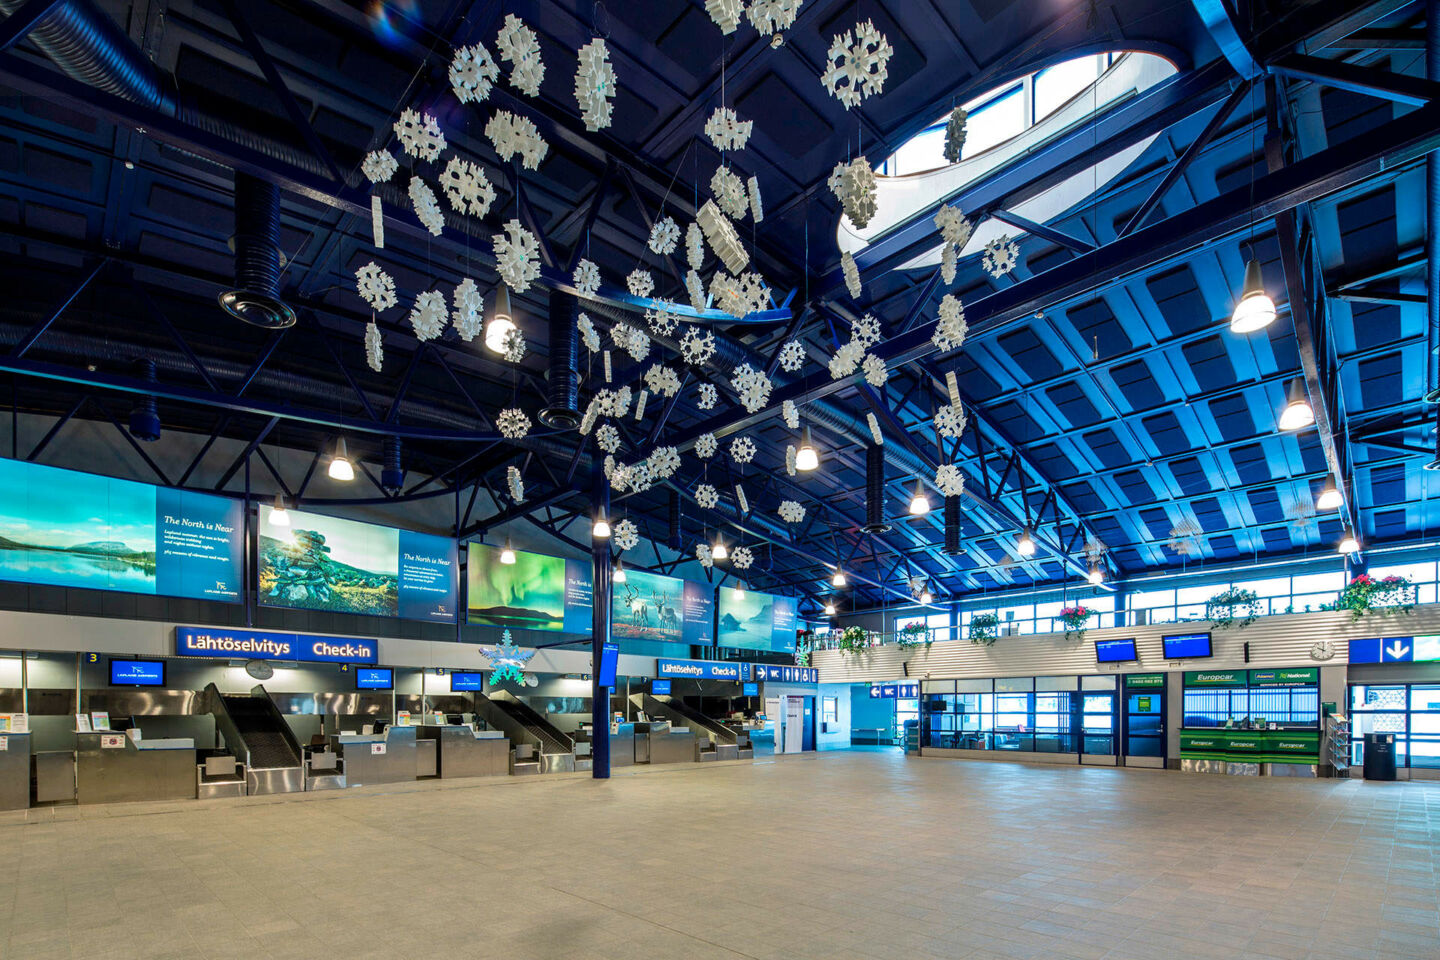 Winter decorations at the Kittilä Arctic Airport, a filming location in Finnish Lapland